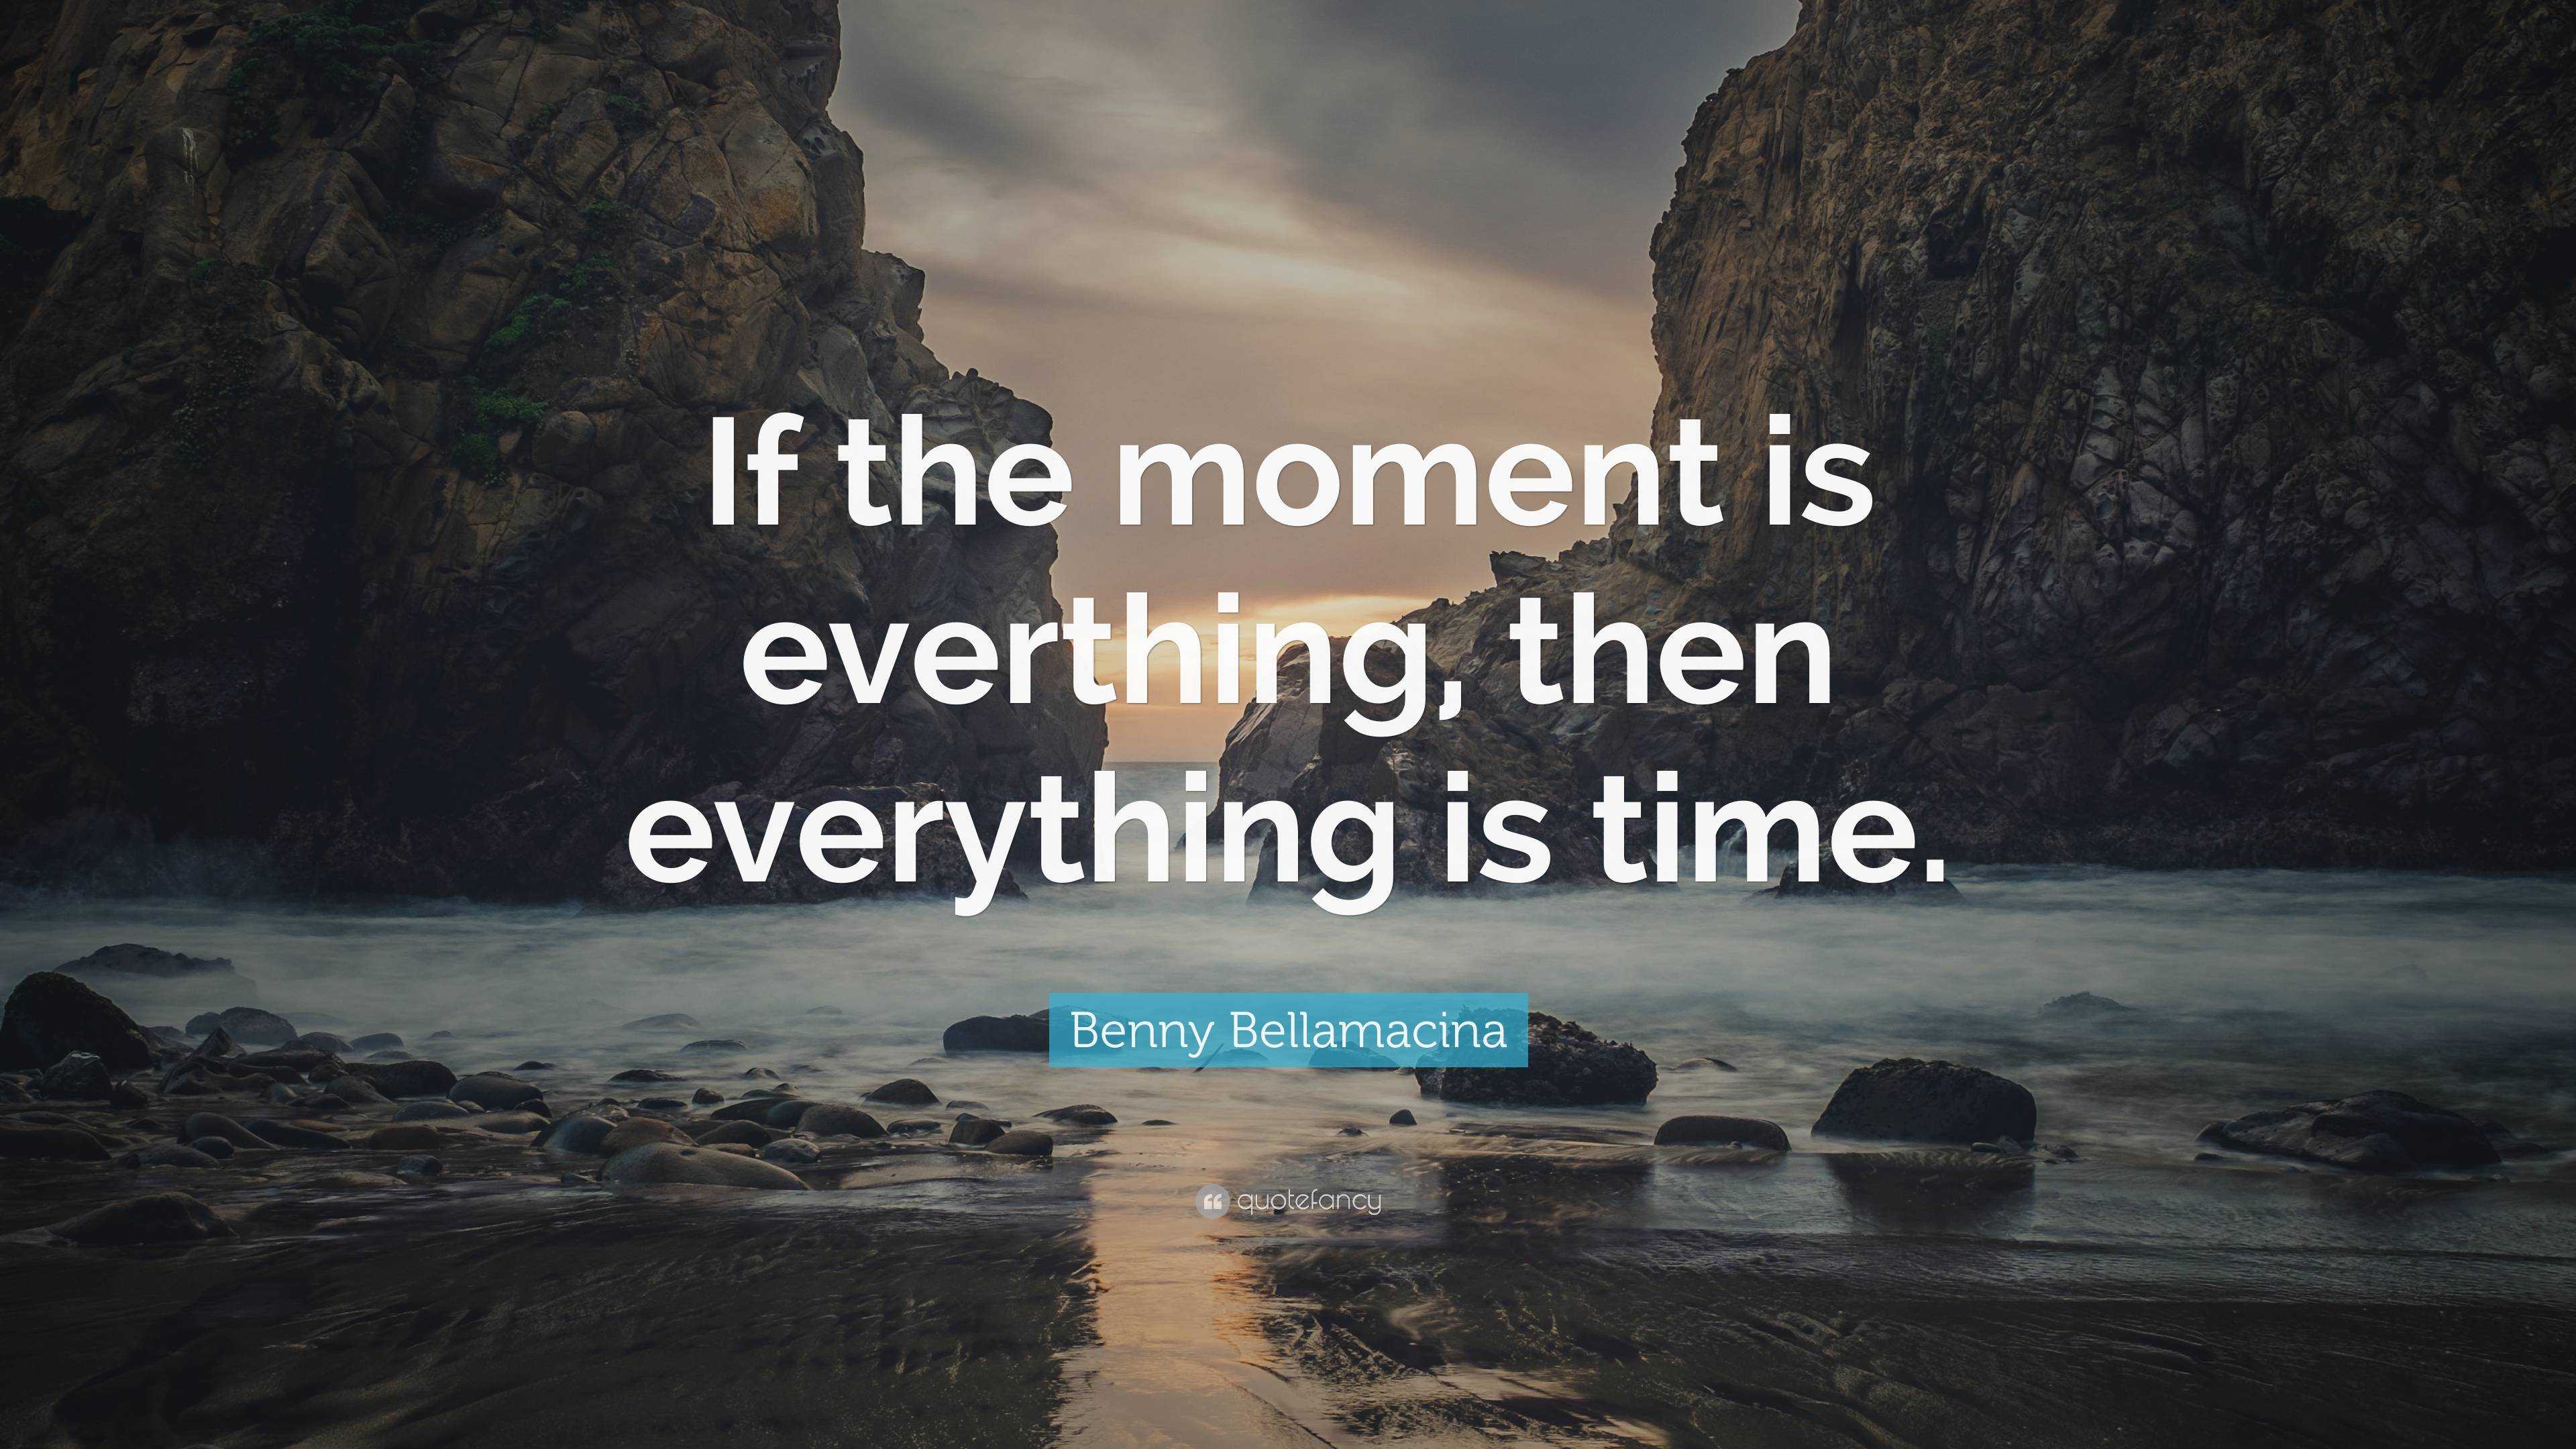 Benny Bellamacina Quote: “If the moment is everthing, then everything ...